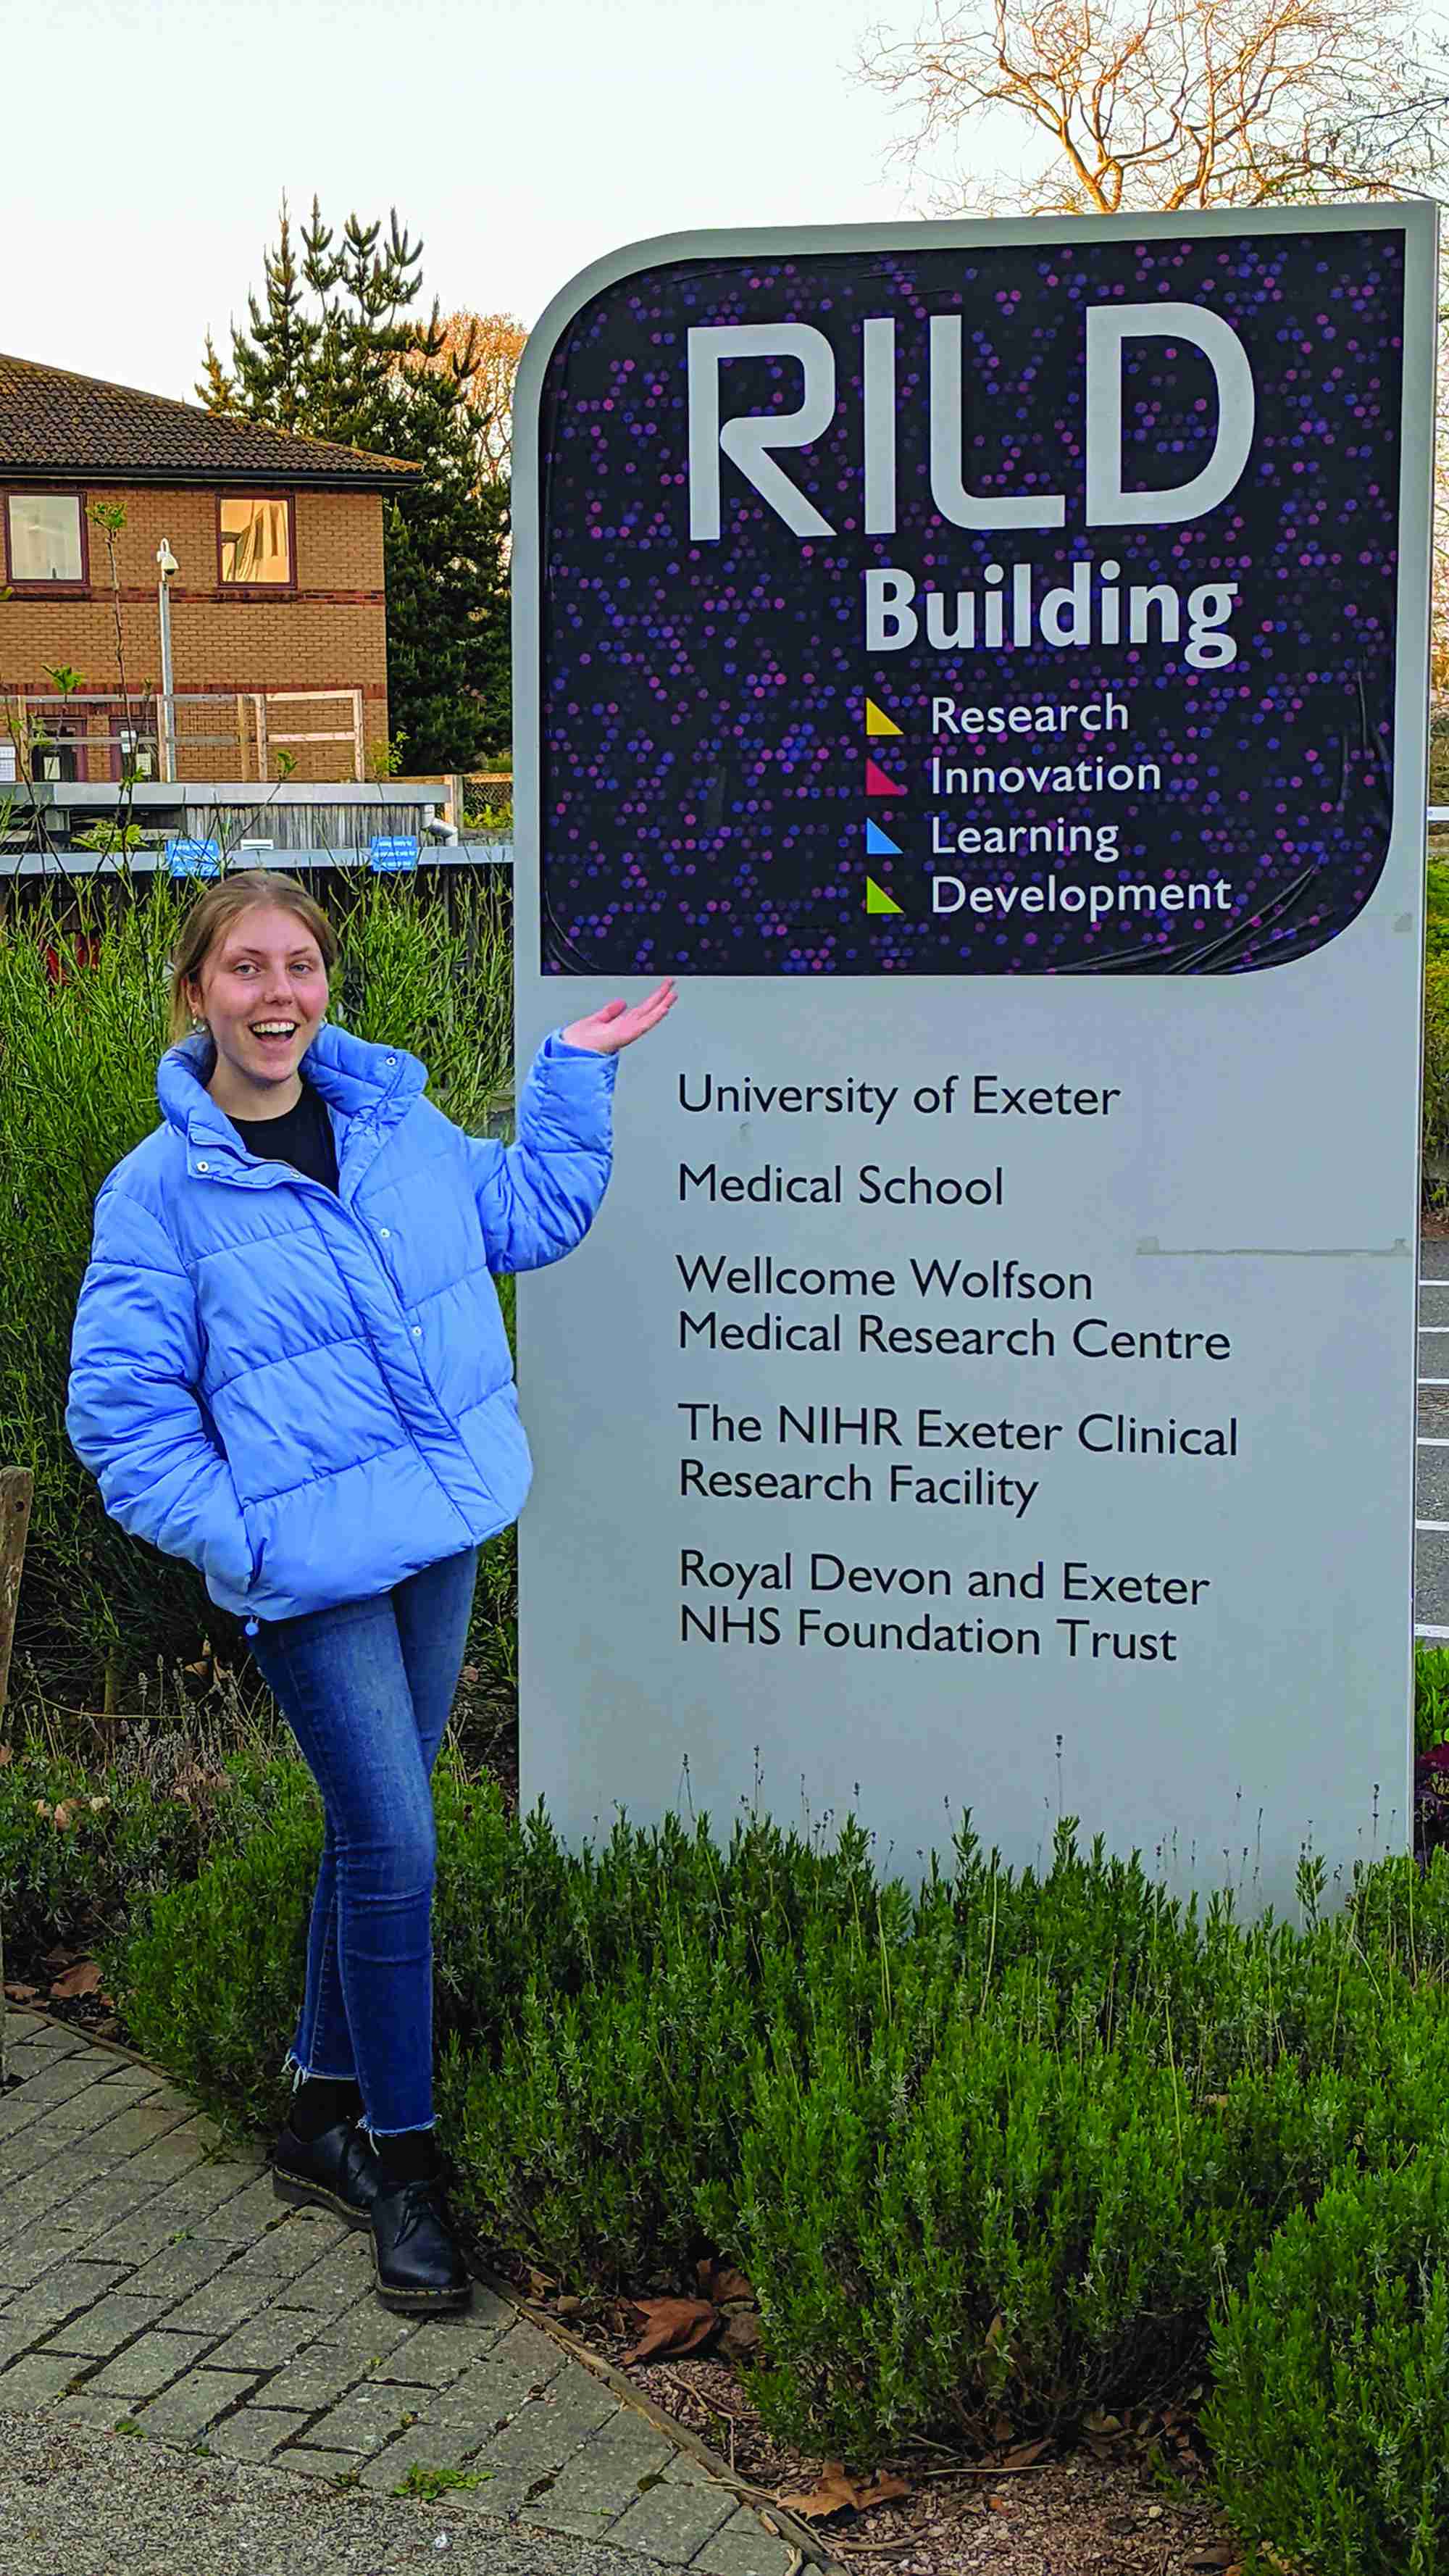 Valentina Abba at the University of Exeter